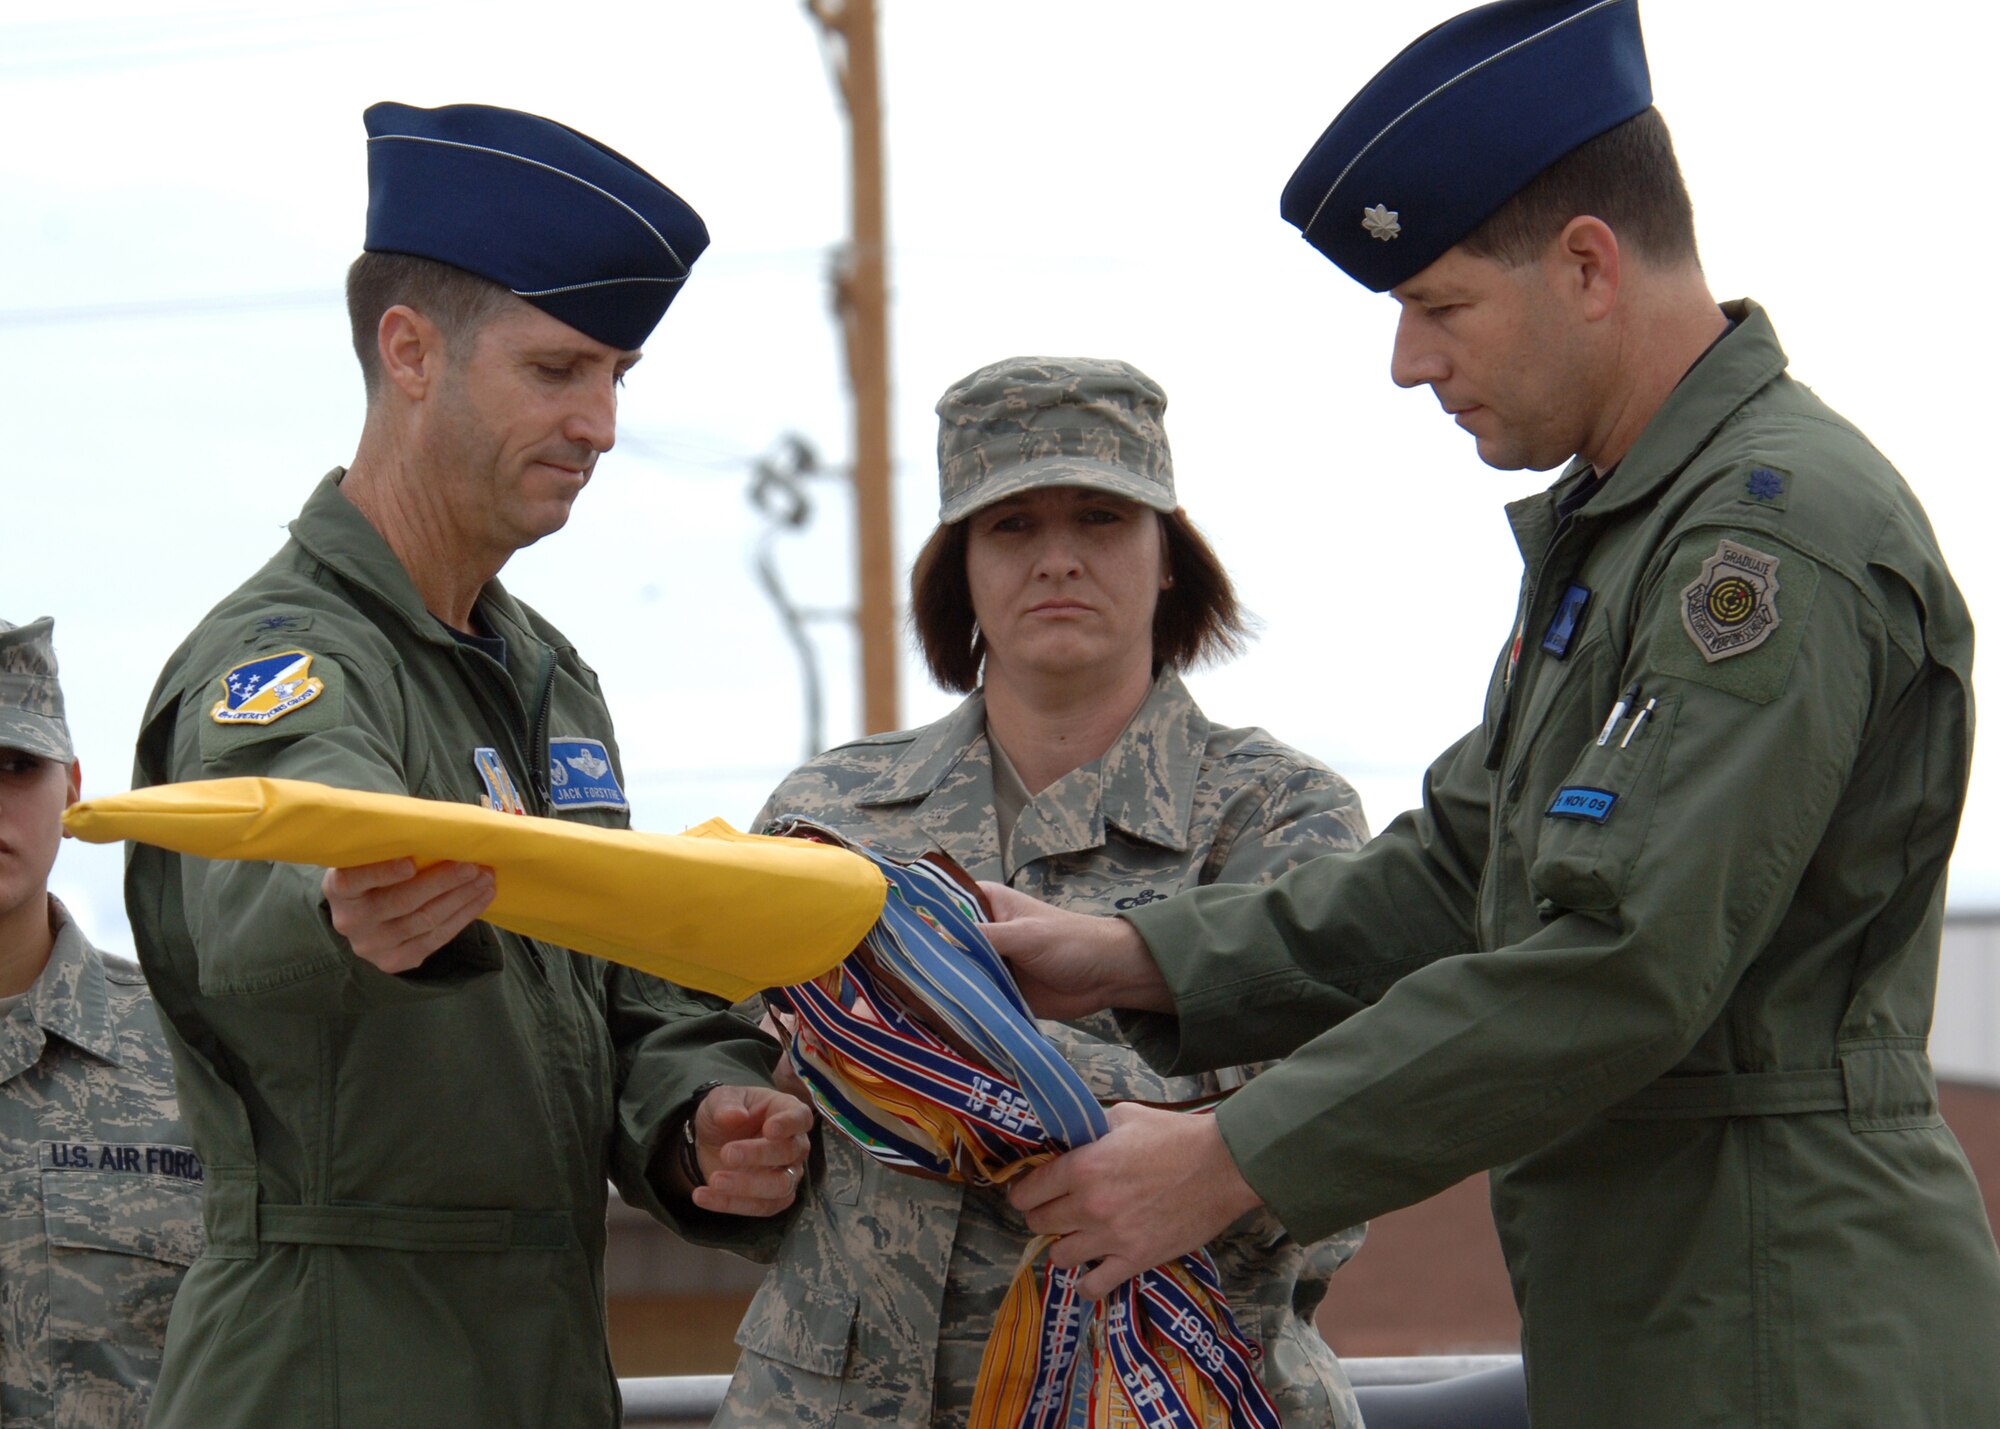 Col. Jack Forsythe, 49th Operations Group commander, and Lt. Col. Mike Hernandez uncase the 7th Fighter Squadron guidon, May 16 at Holloman Air Force Base, N.M. Colonel Hernandez assumed command of the of the 7th FS. (U.S. Air Force photo/Airman 1st Class John Strong)